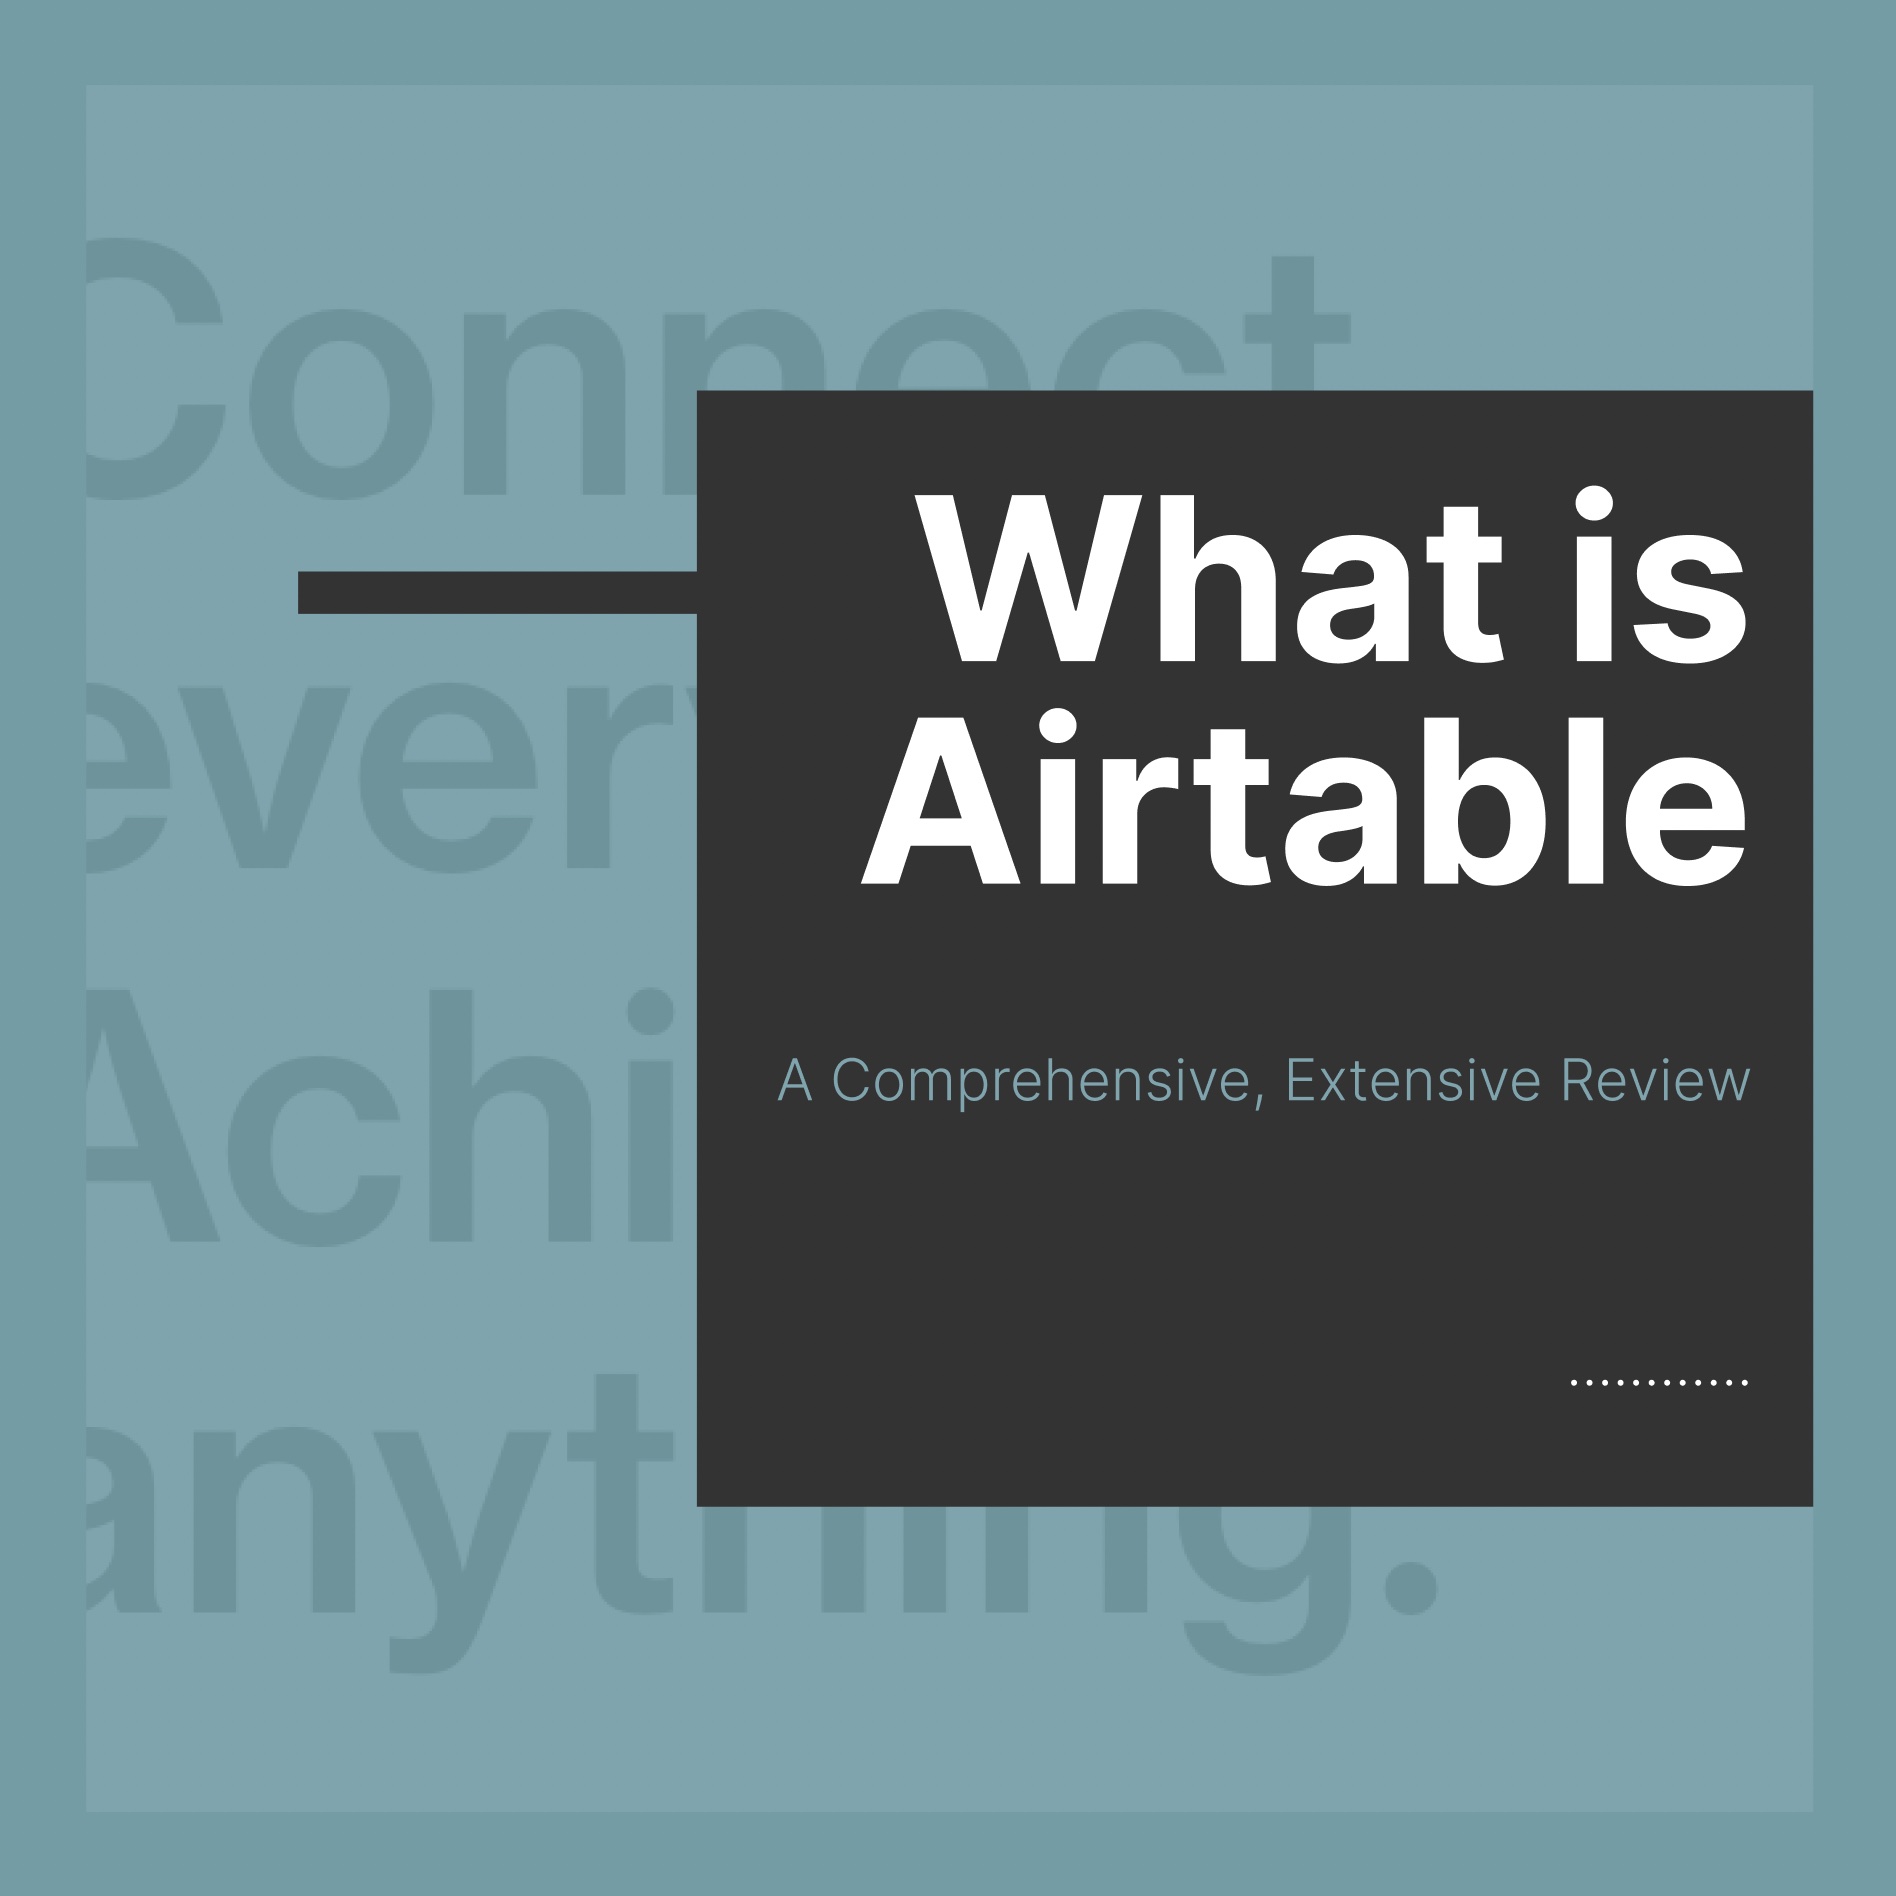 What is Airtable? A Comprehensive, Extensive Review